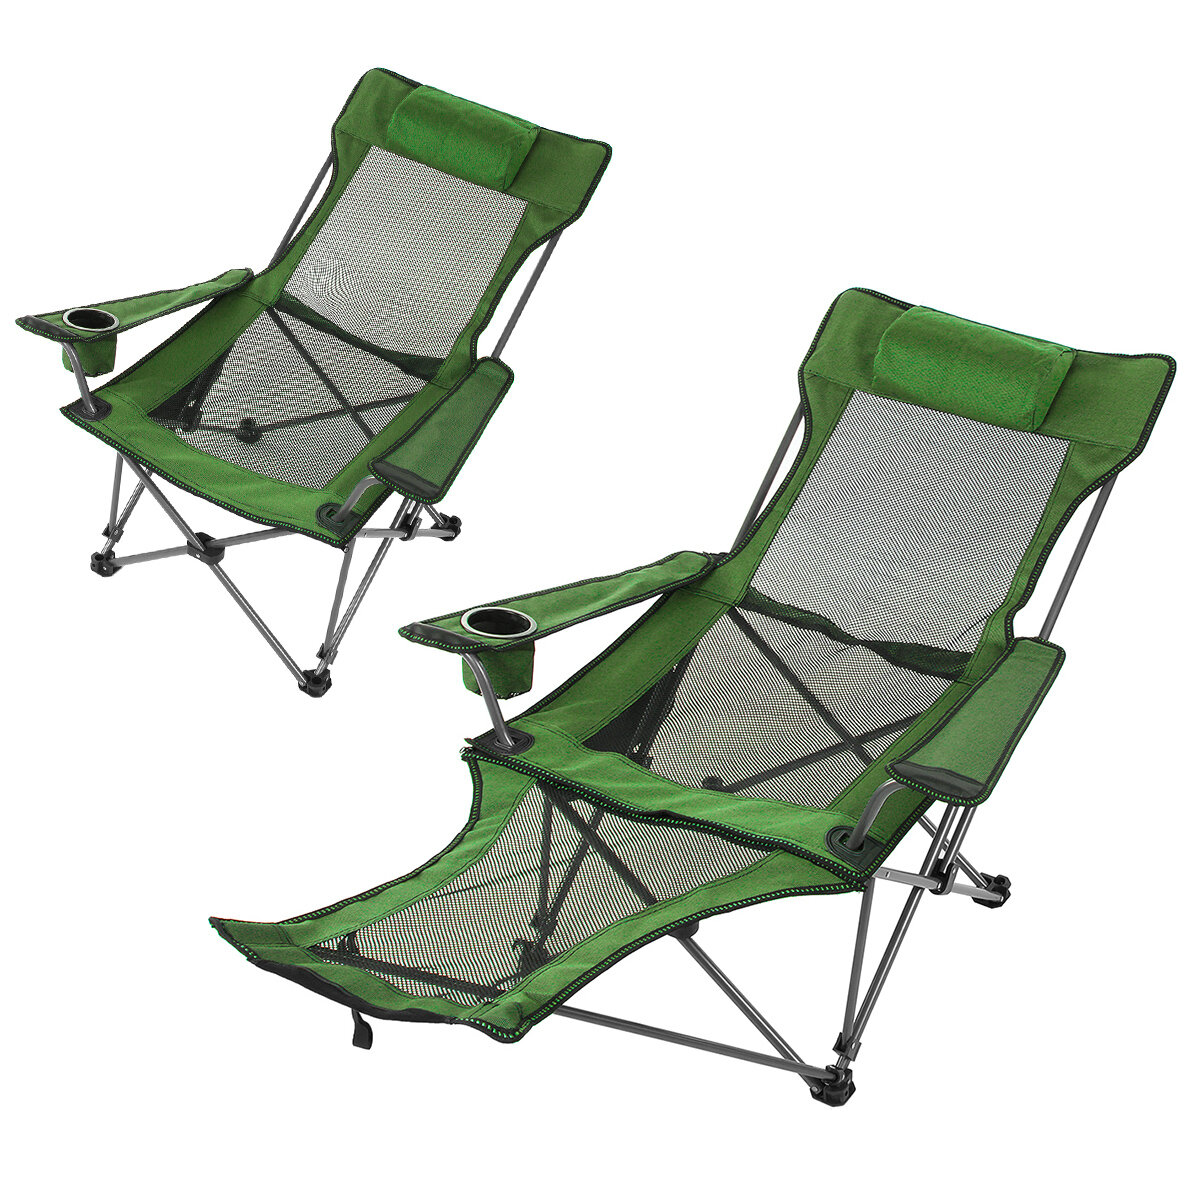 Klapstoel Draagbare Strand Lunch Dutje Stoel Picknick Barbecue Kantoor Fauteuil Stoel Outdoor Camping